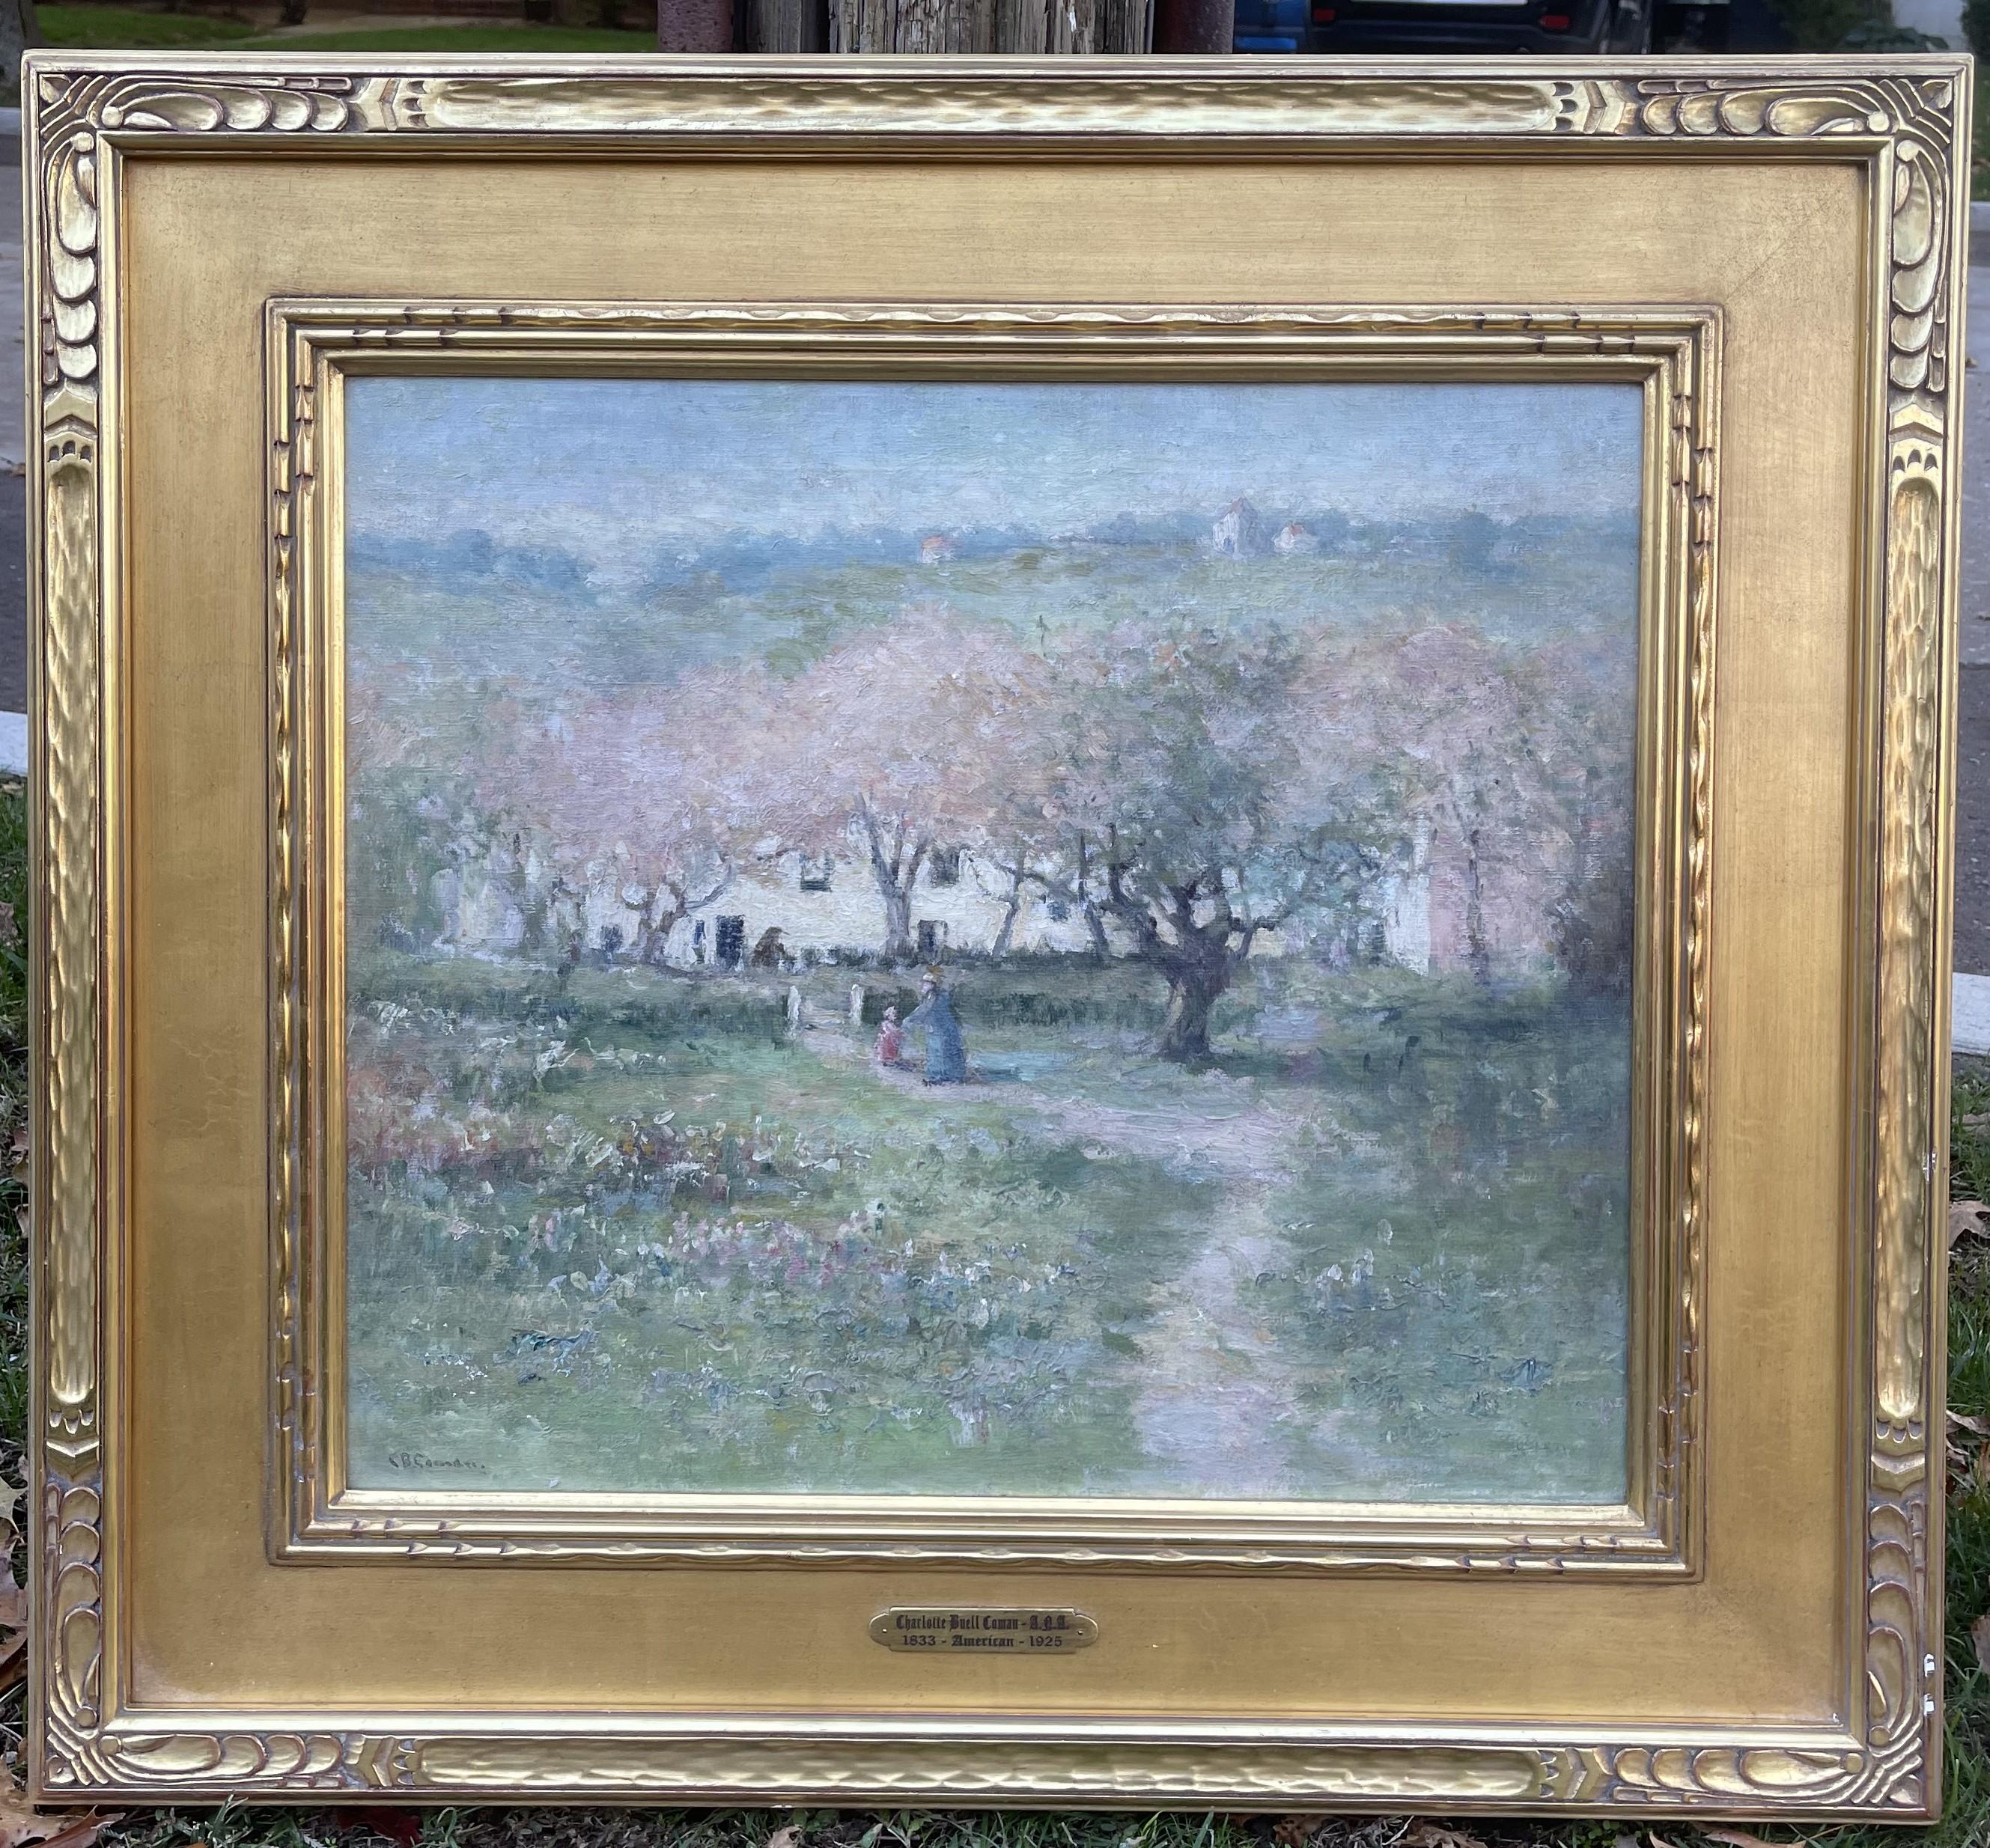 Bucolic Scene - Painting by Charlotte Buell Coman